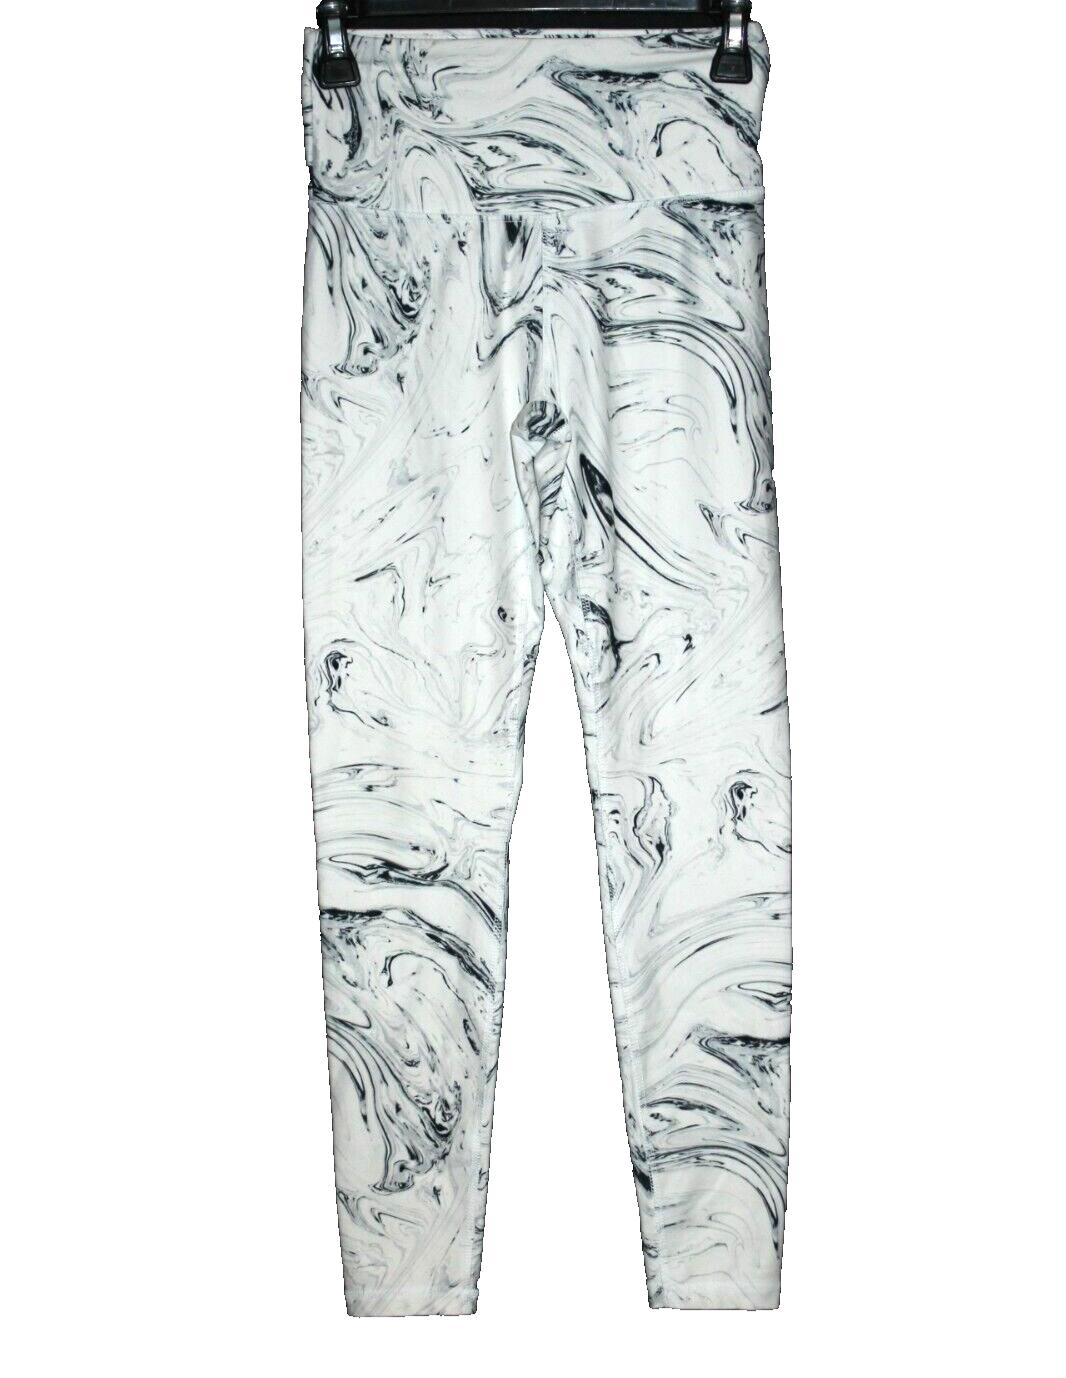 The Balance Collection Leggings Small S White Gray Black Marble Yoga  Activewear